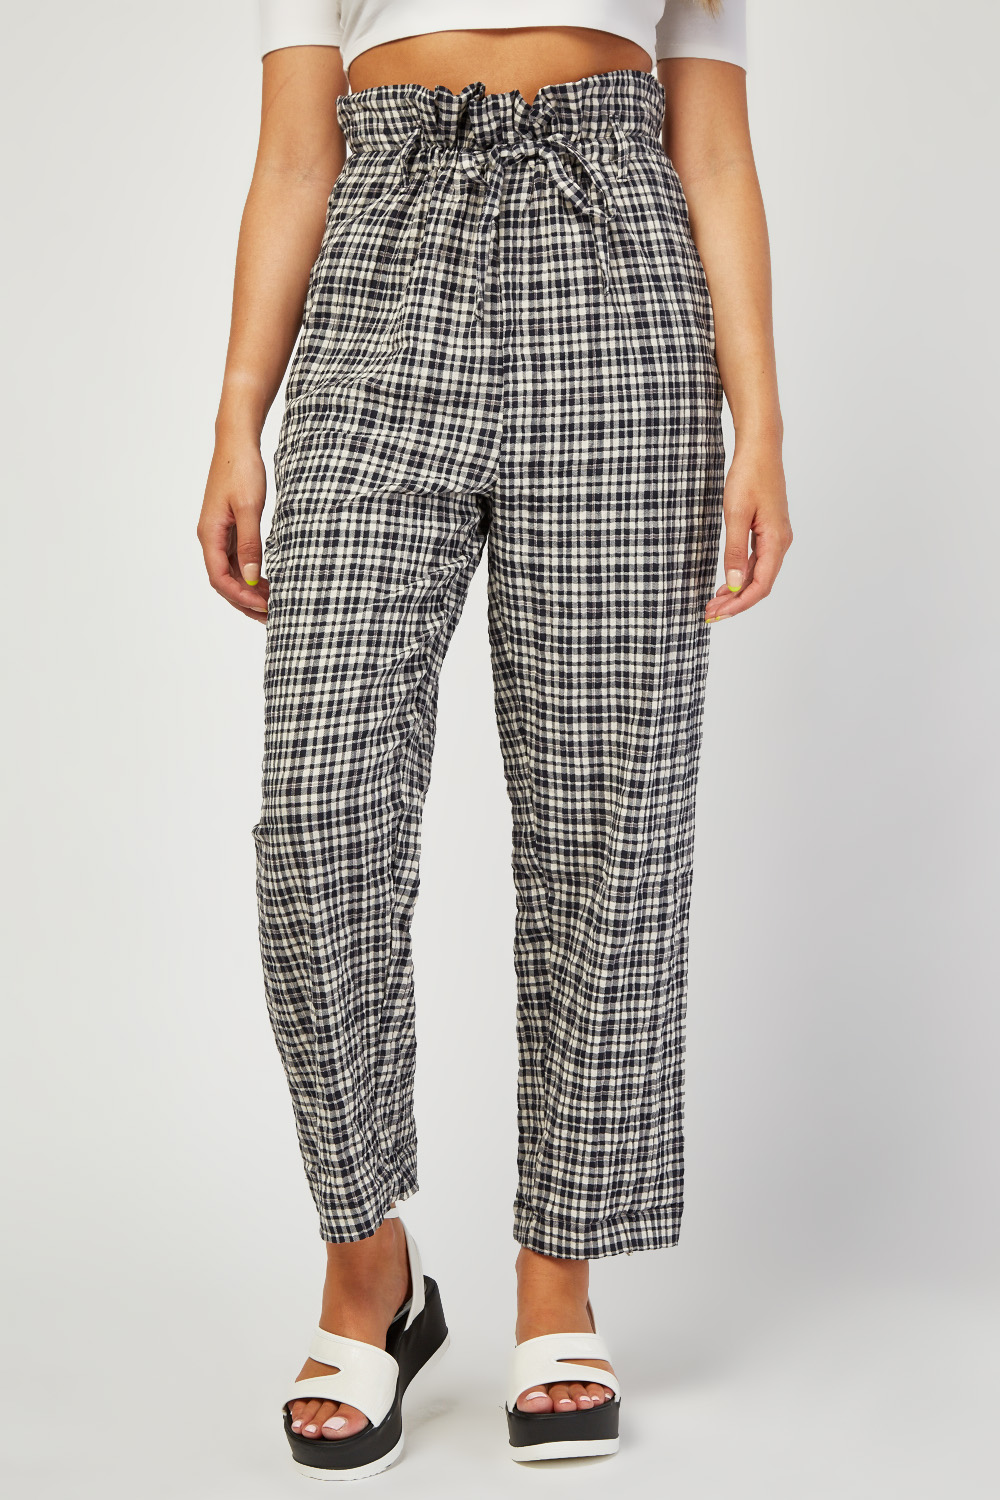 Crinkled High Waist Checkered Trousers - Just $7